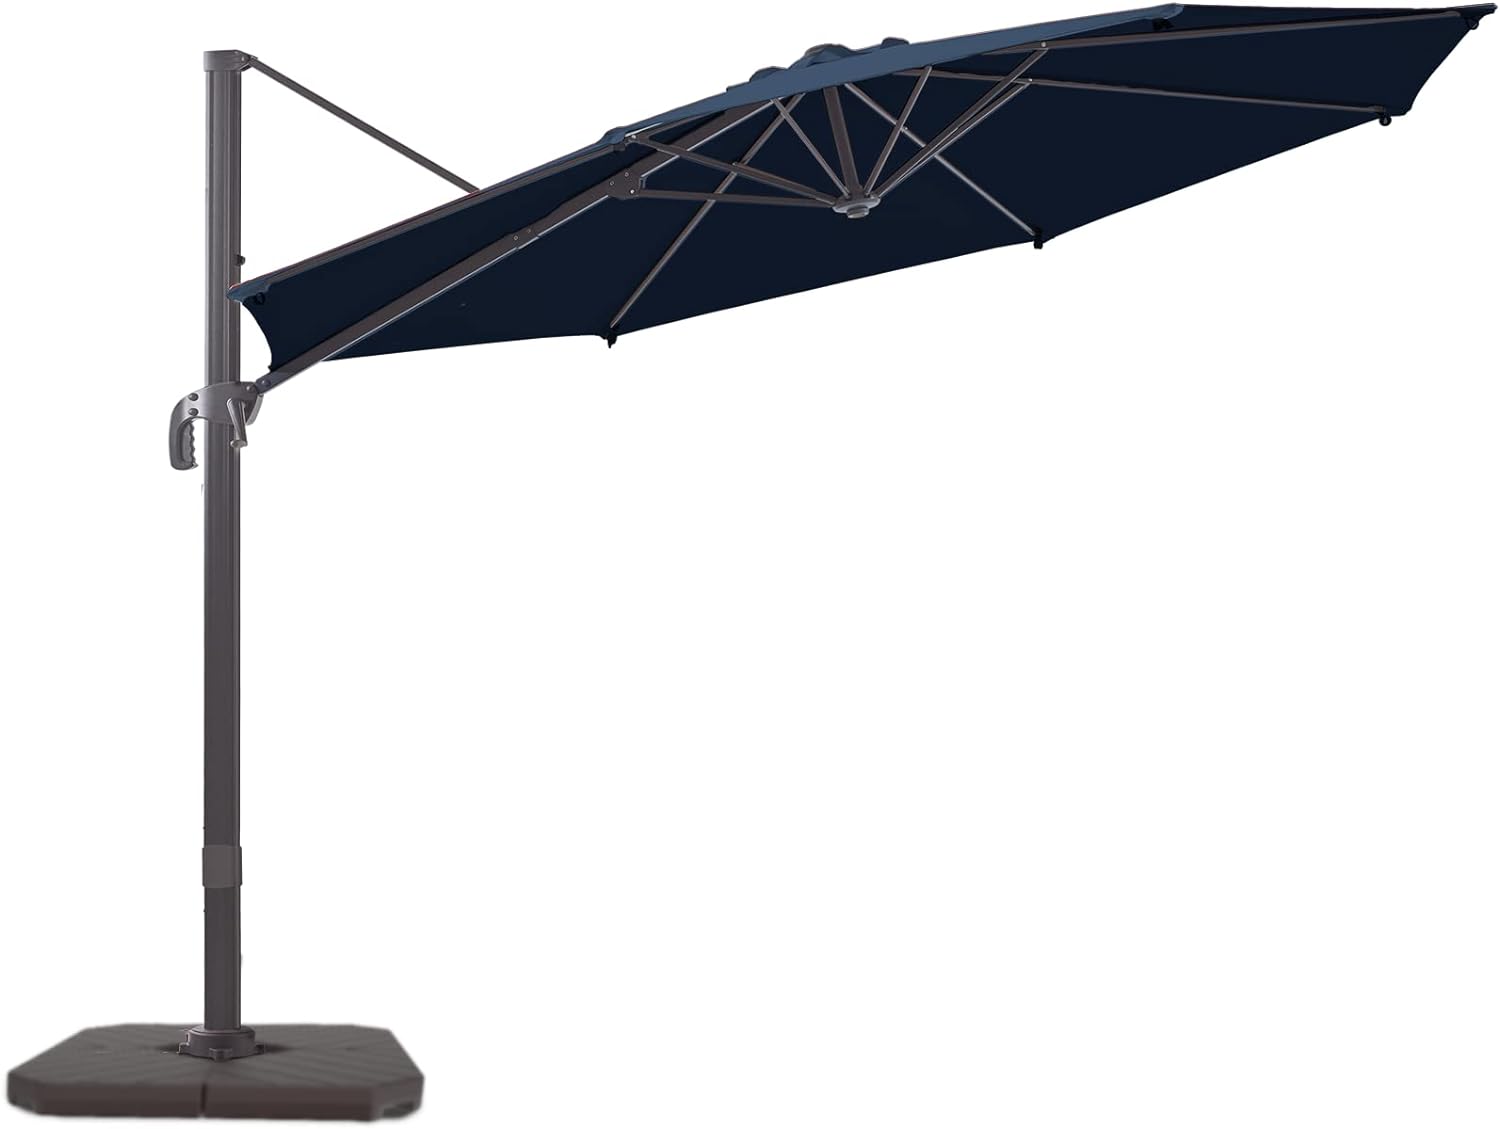 wikiwiki S Series Cantilever Patio Umbrellas 10 FT Outdoor Offset Umbrella/Fade & UV Resistant Solution-dyed Fabric, 5 Level 360 Rotation Aluminum Pole for Deck Pool Backyard Garden, Navy Blue